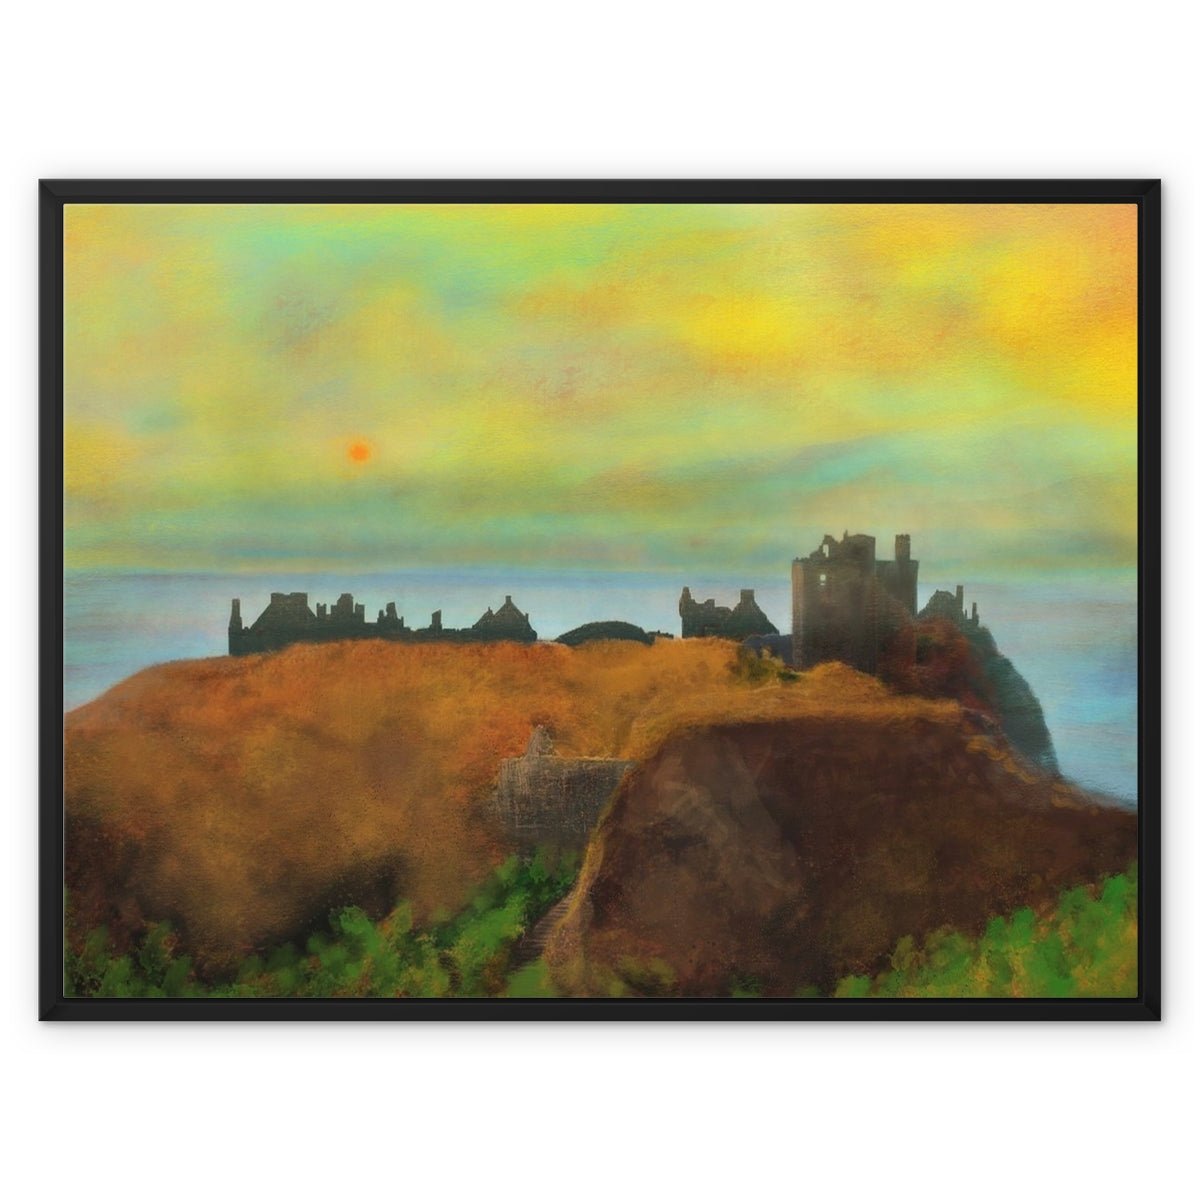 Dunnottar Castle Dusk Dusk Painting | Framed Canvas From Scotland-Floating Framed Canvas Prints-Historic & Iconic Scotland Art Gallery-32"x24"-Paintings, Prints, Homeware, Art Gifts From Scotland By Scottish Artist Kevin Hunter